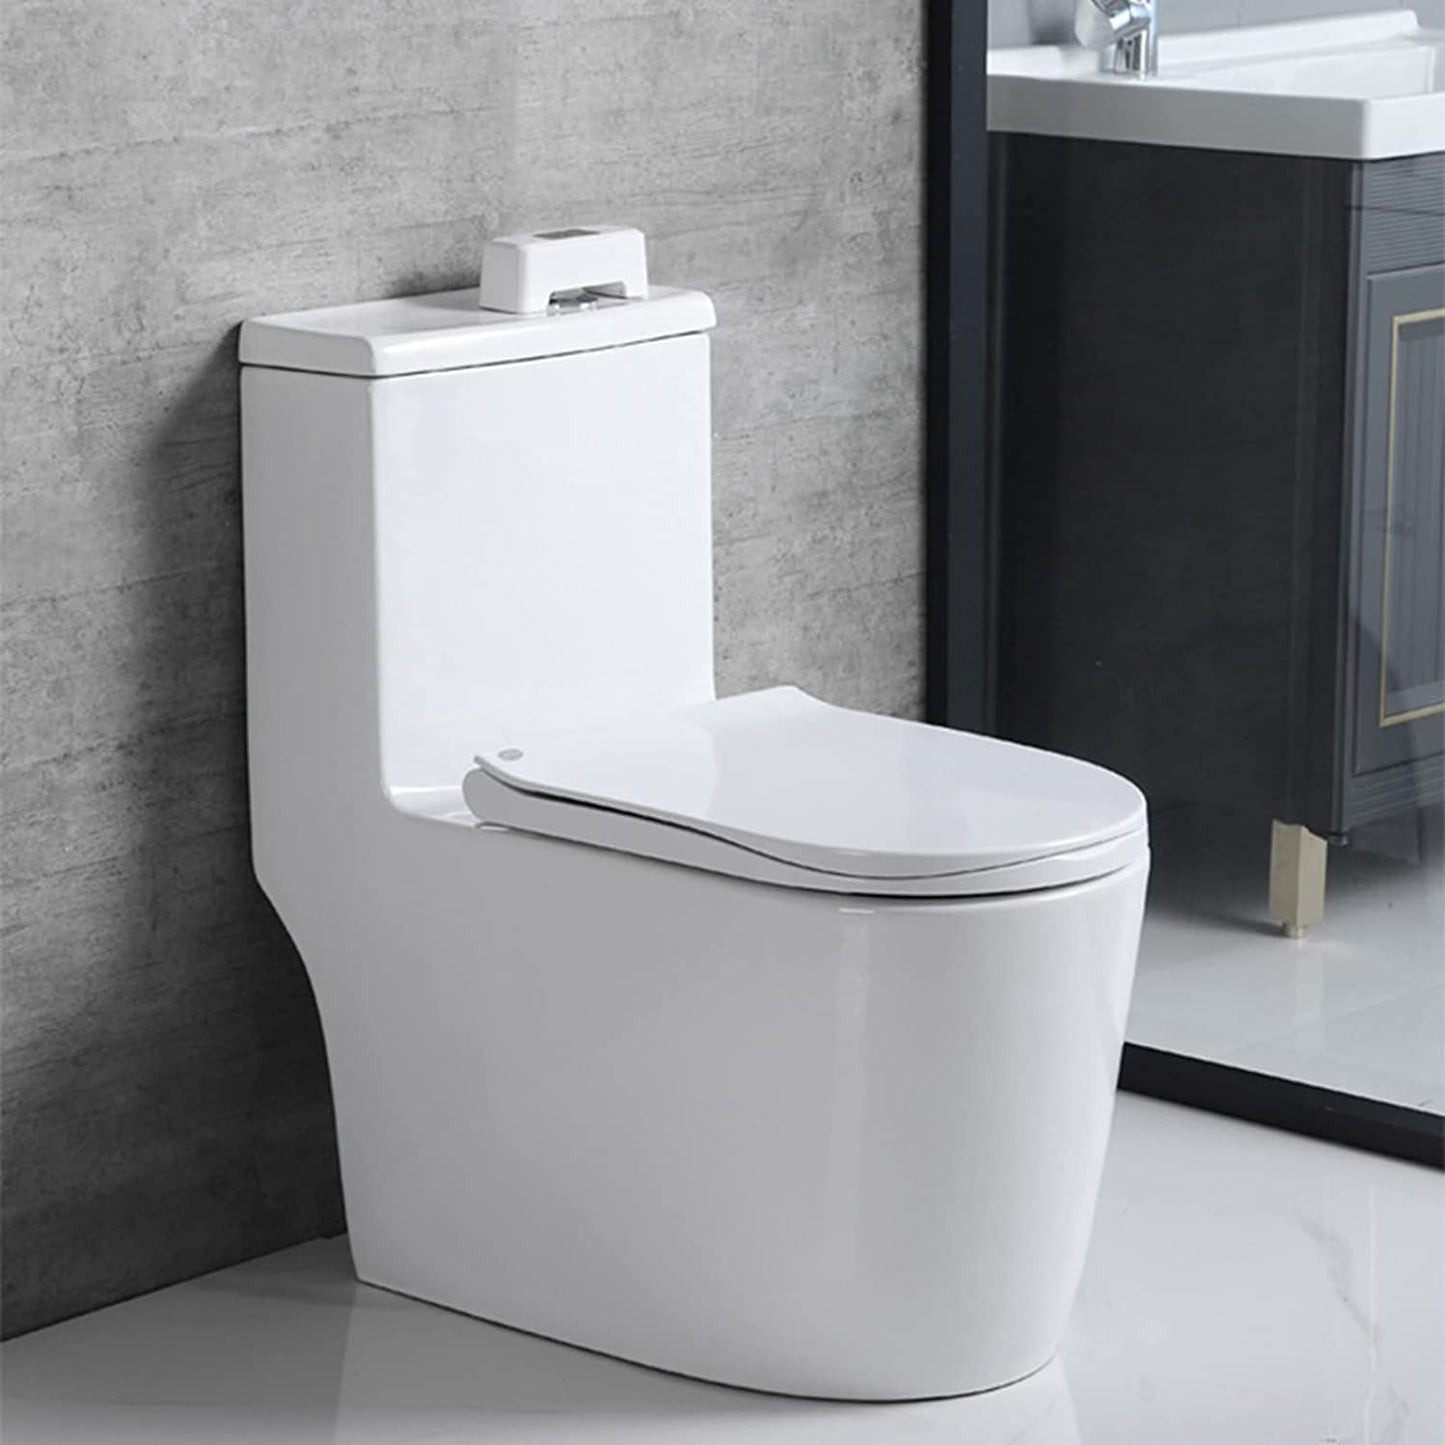 Automatic Toilet Flusher for Home and Public Use.